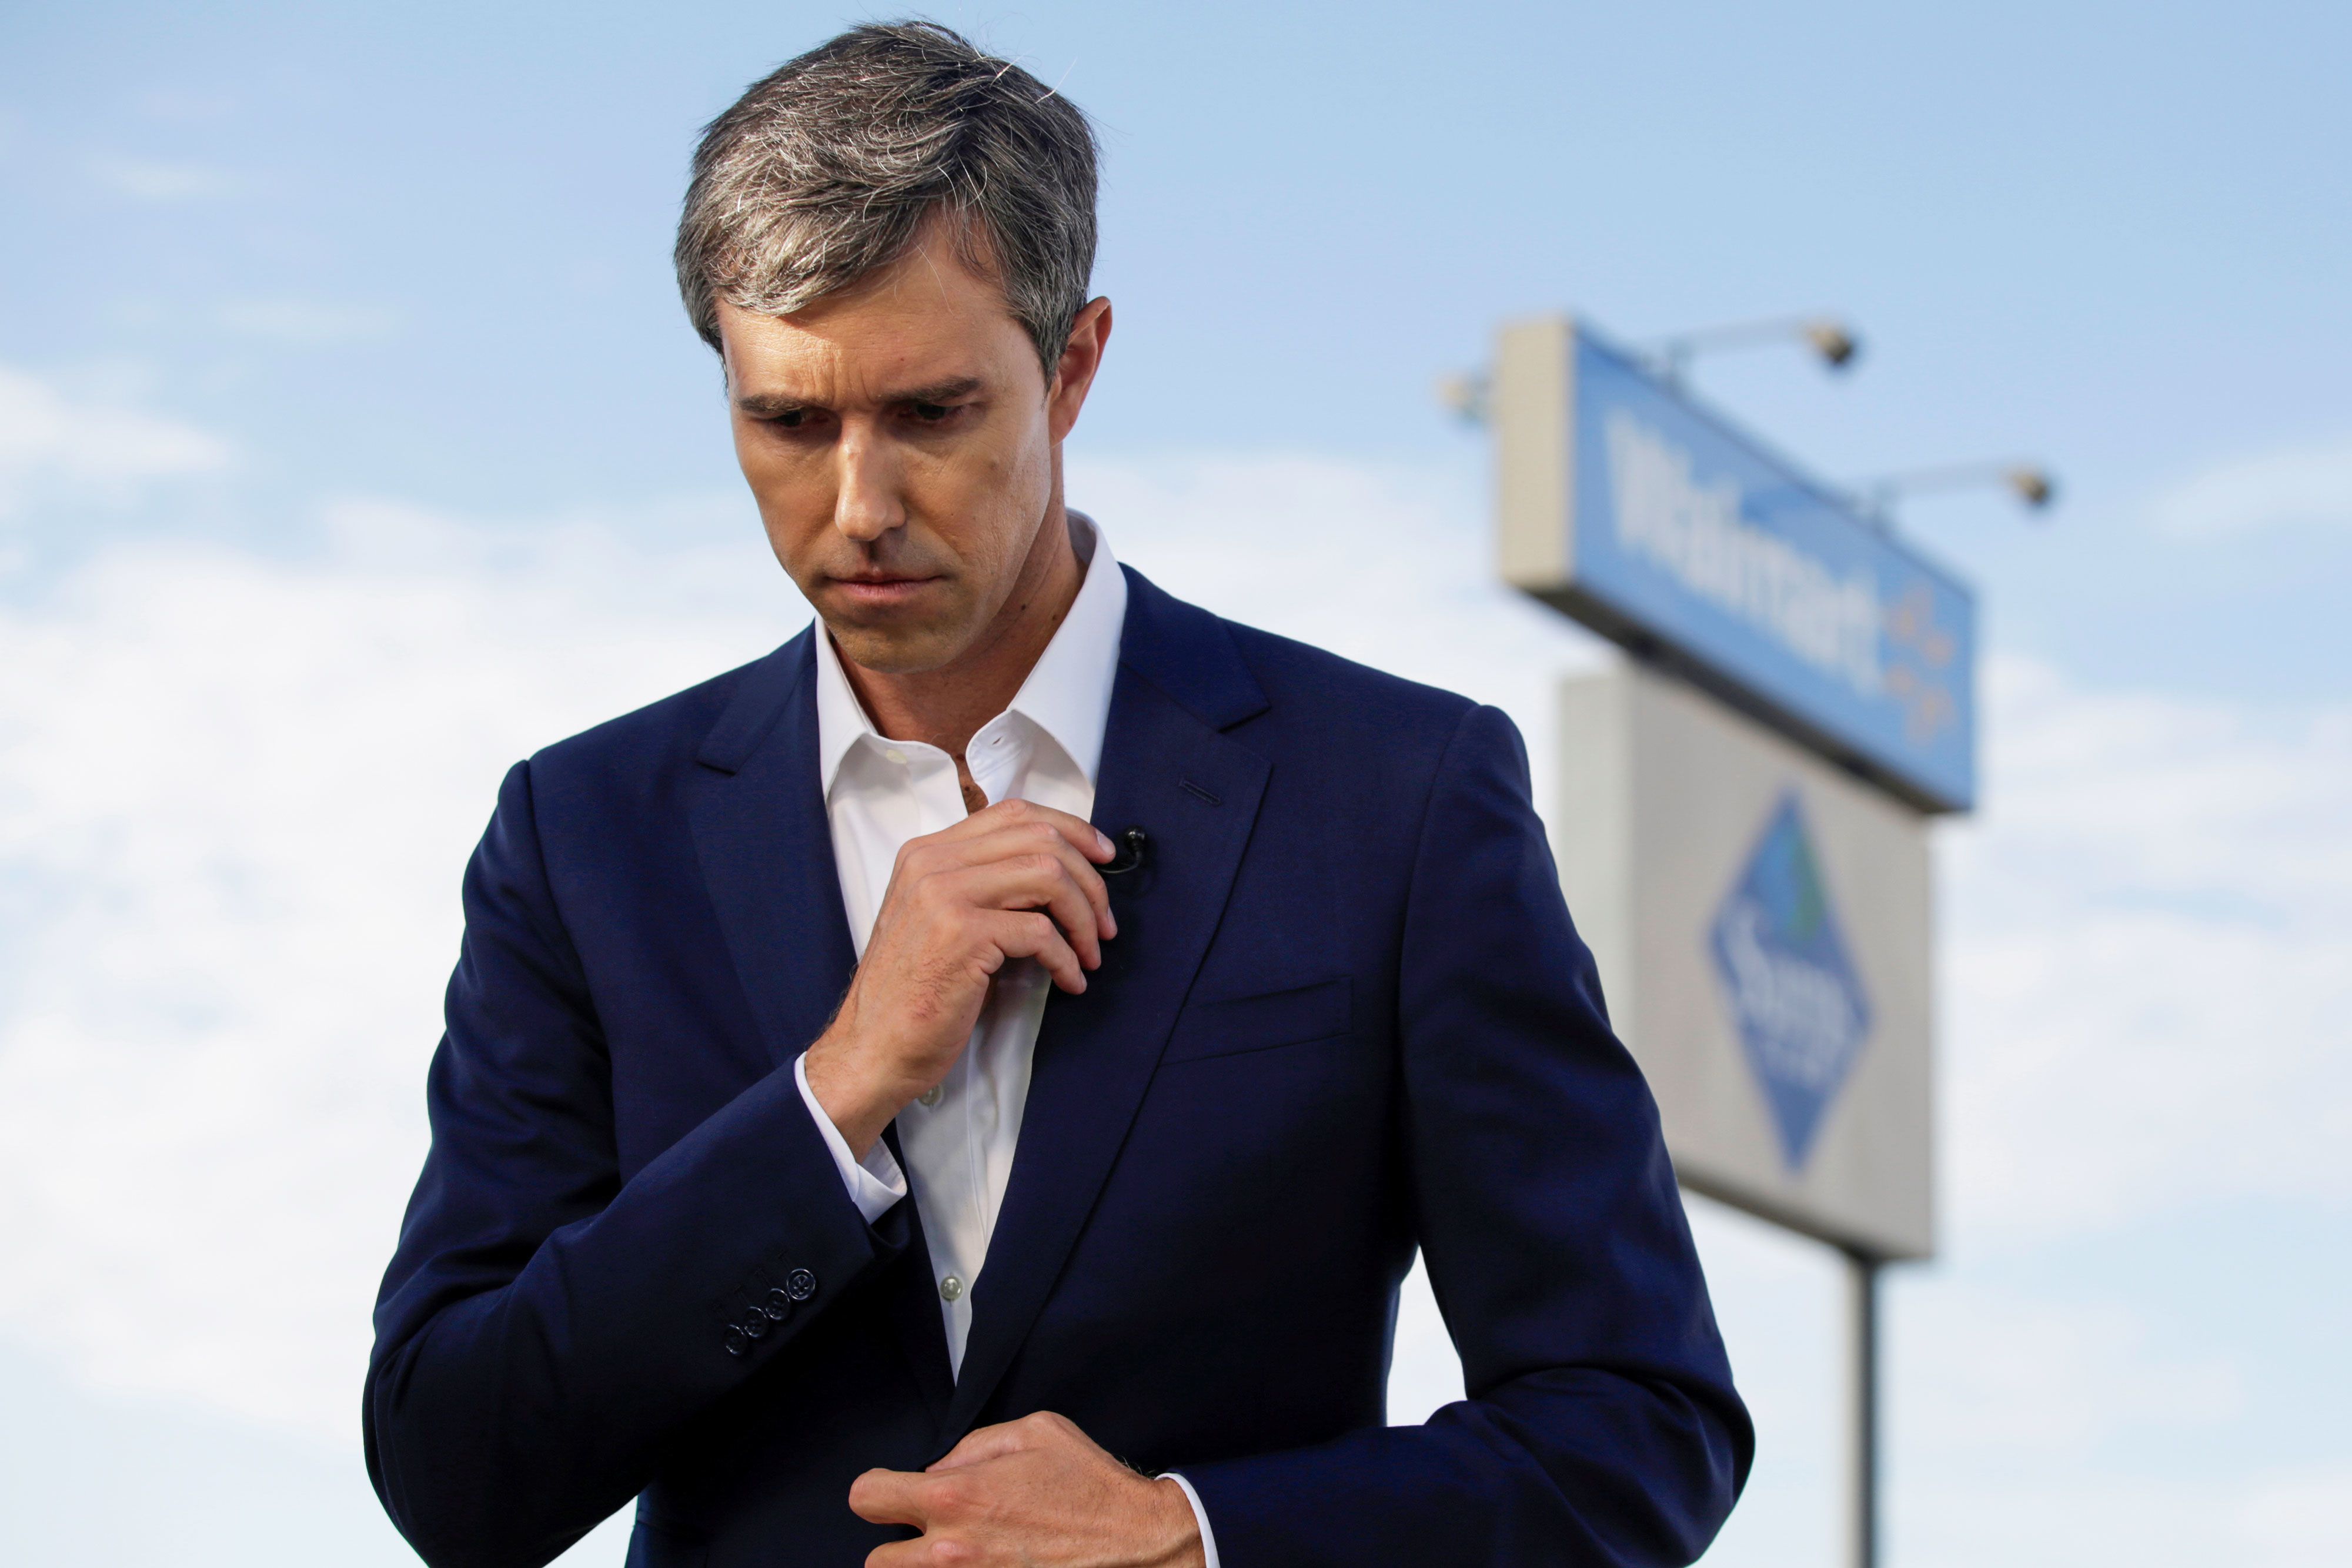 Beto O'Rourke goes after immunity for Big Tech after El Paso shooting